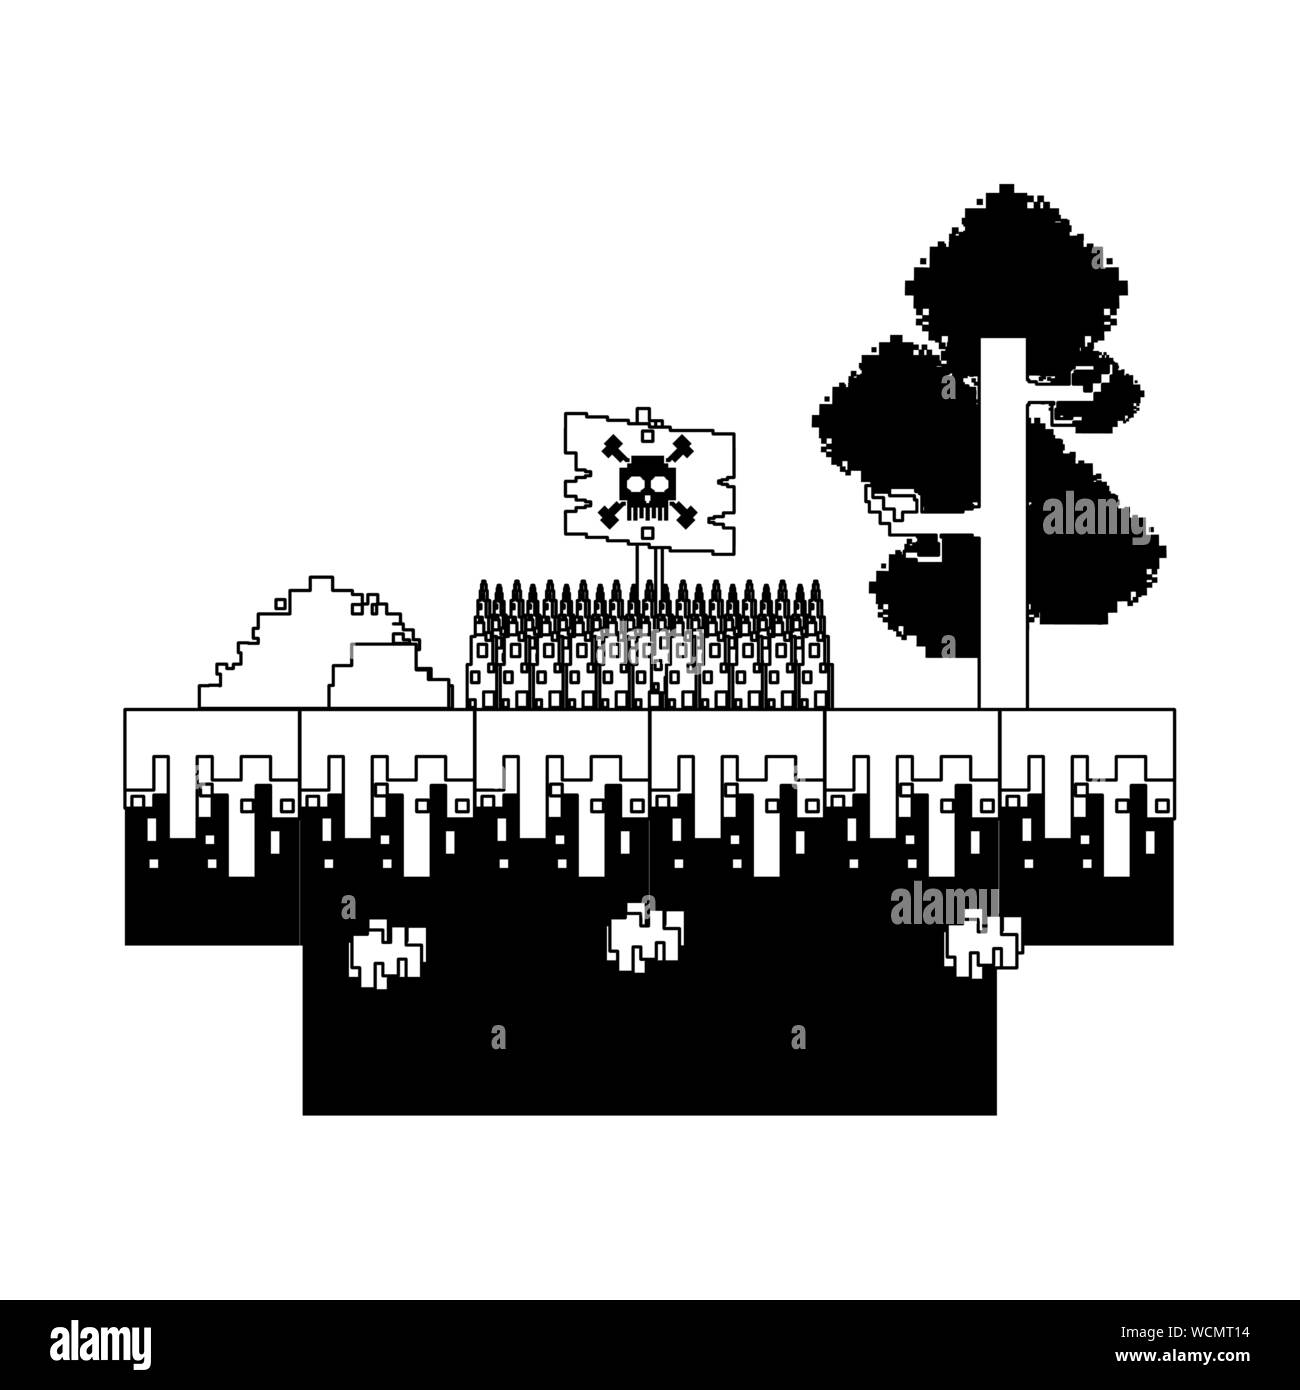 Pixel art Black and White Stock Photos & Images - Alamy